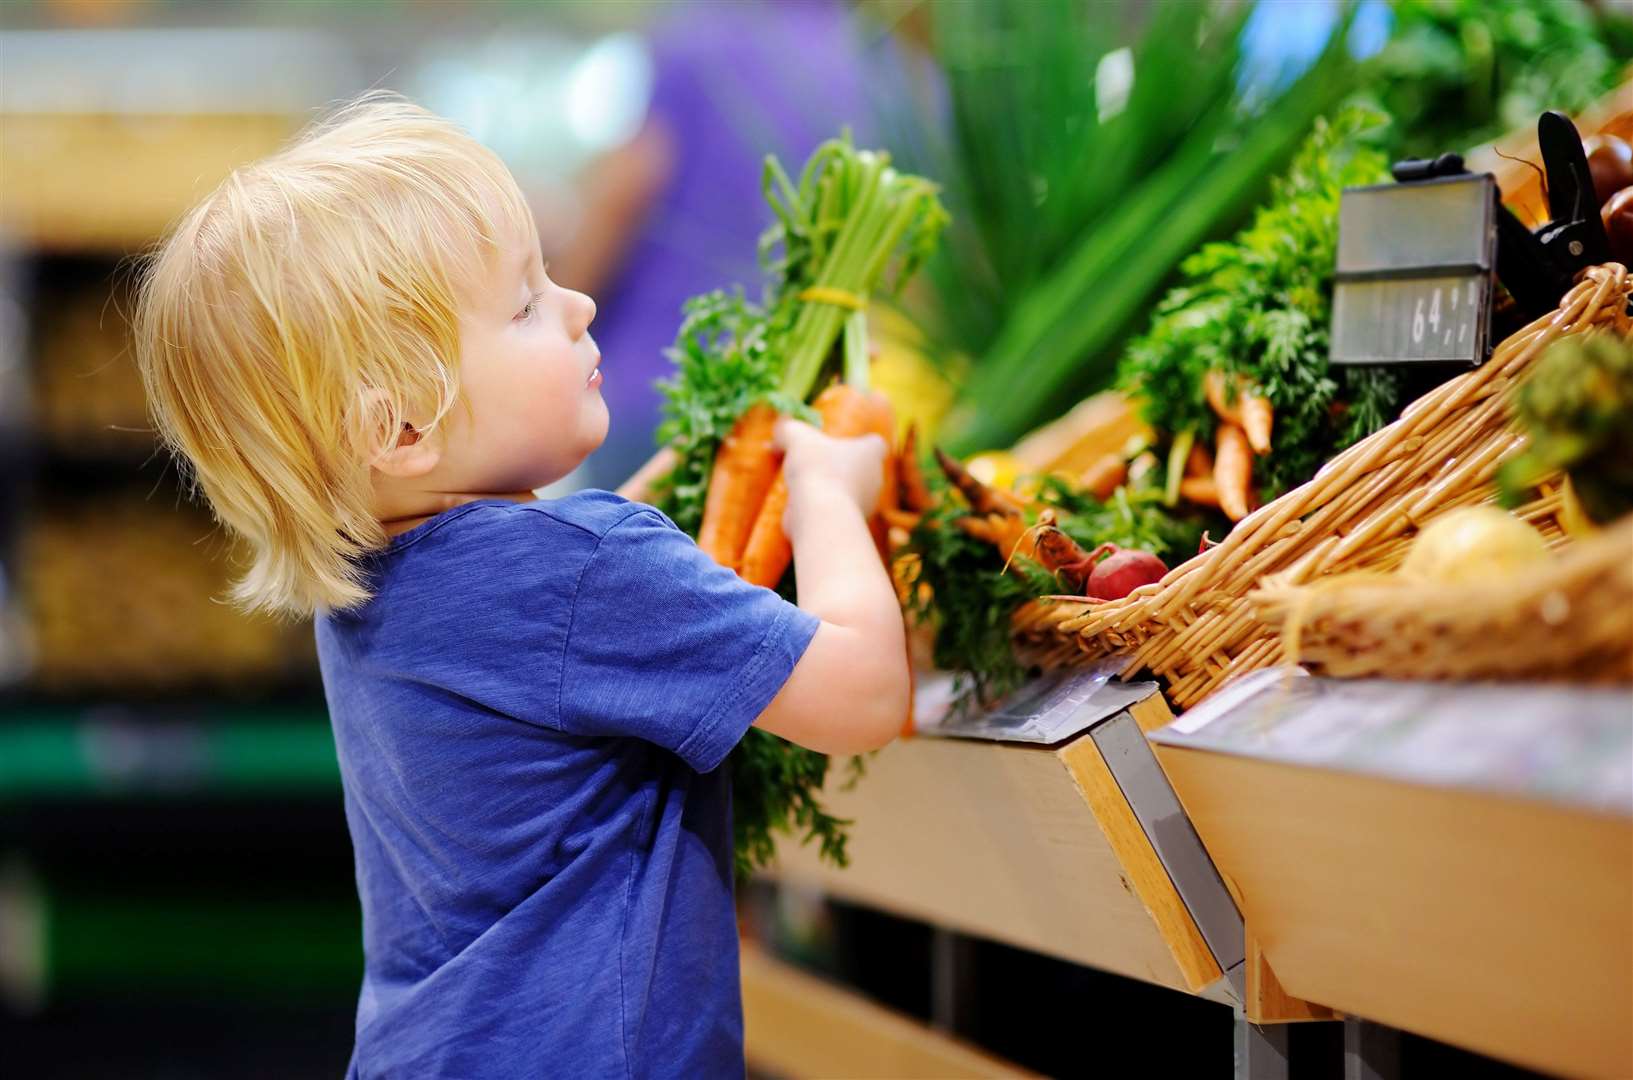 Supermarkets need to make healthy food more appealing to children says Lidl. Image: Stock photo.